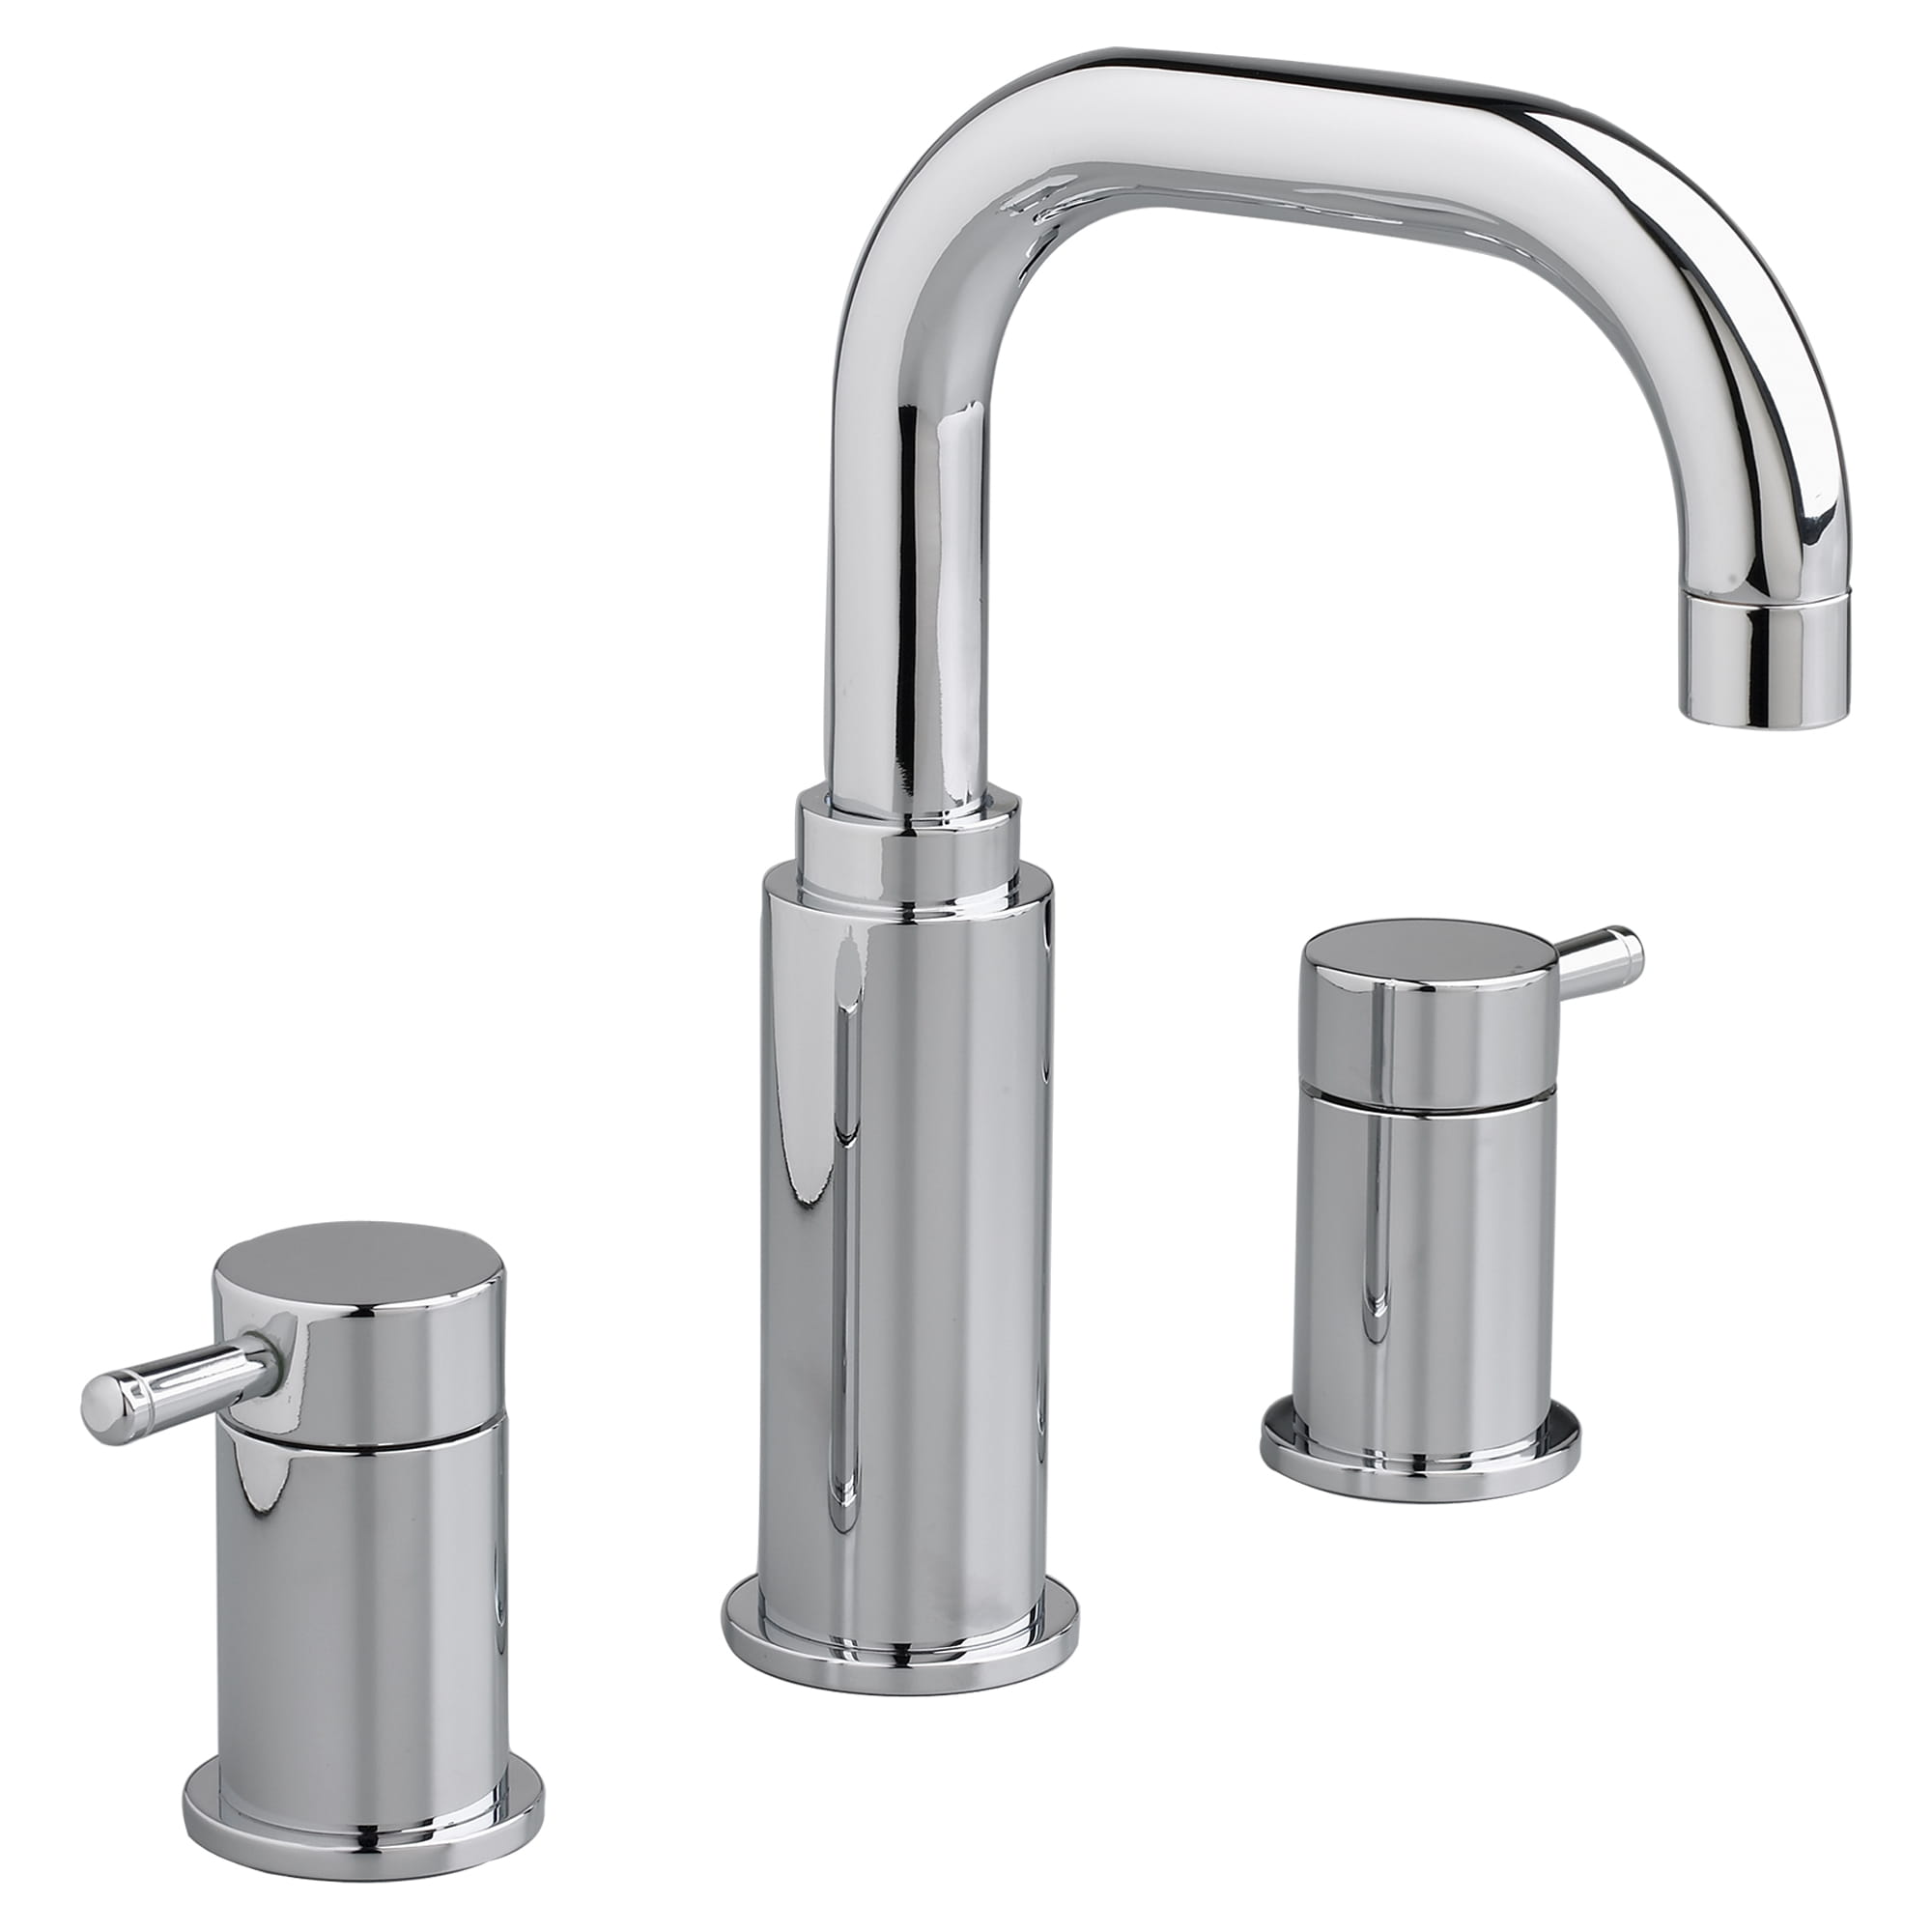 Serin 2 Handle 8 Inch Widespread Bathroom Faucet 12 gpm 45 L min With Lever Handles CHROME